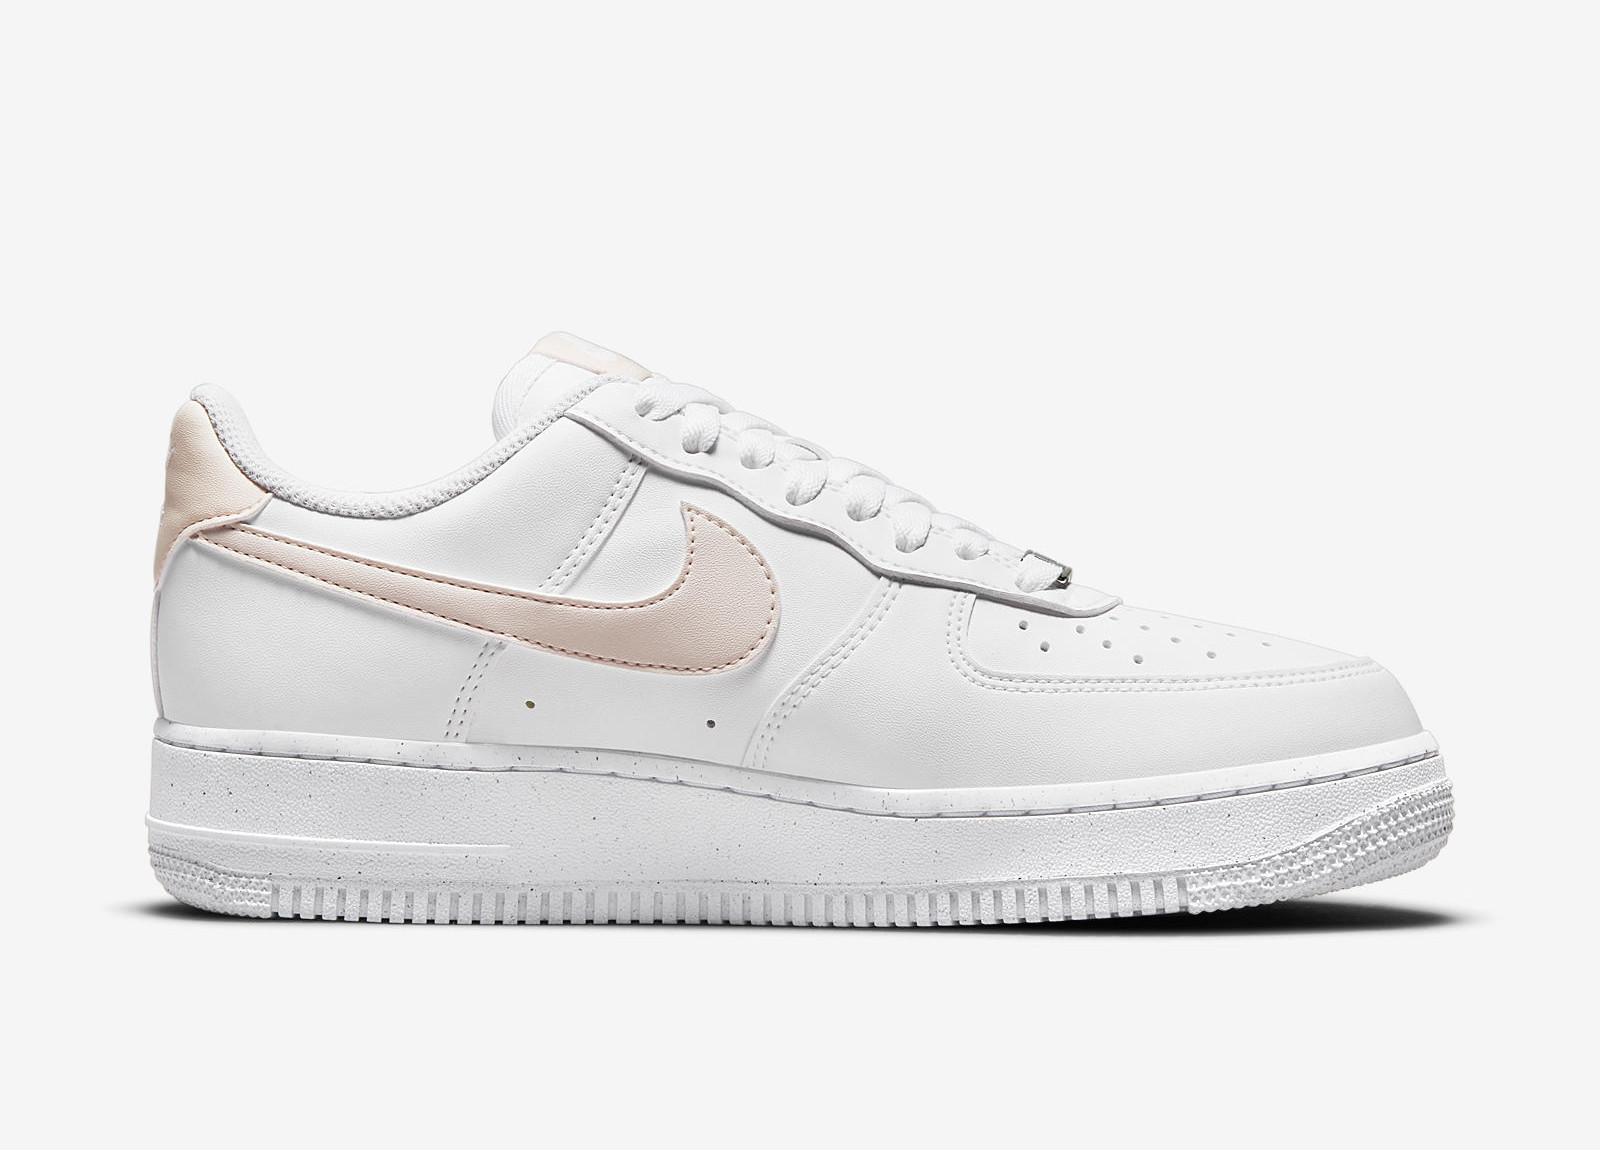 Nike Air Force 1
Next Nature
White / Pale Coral